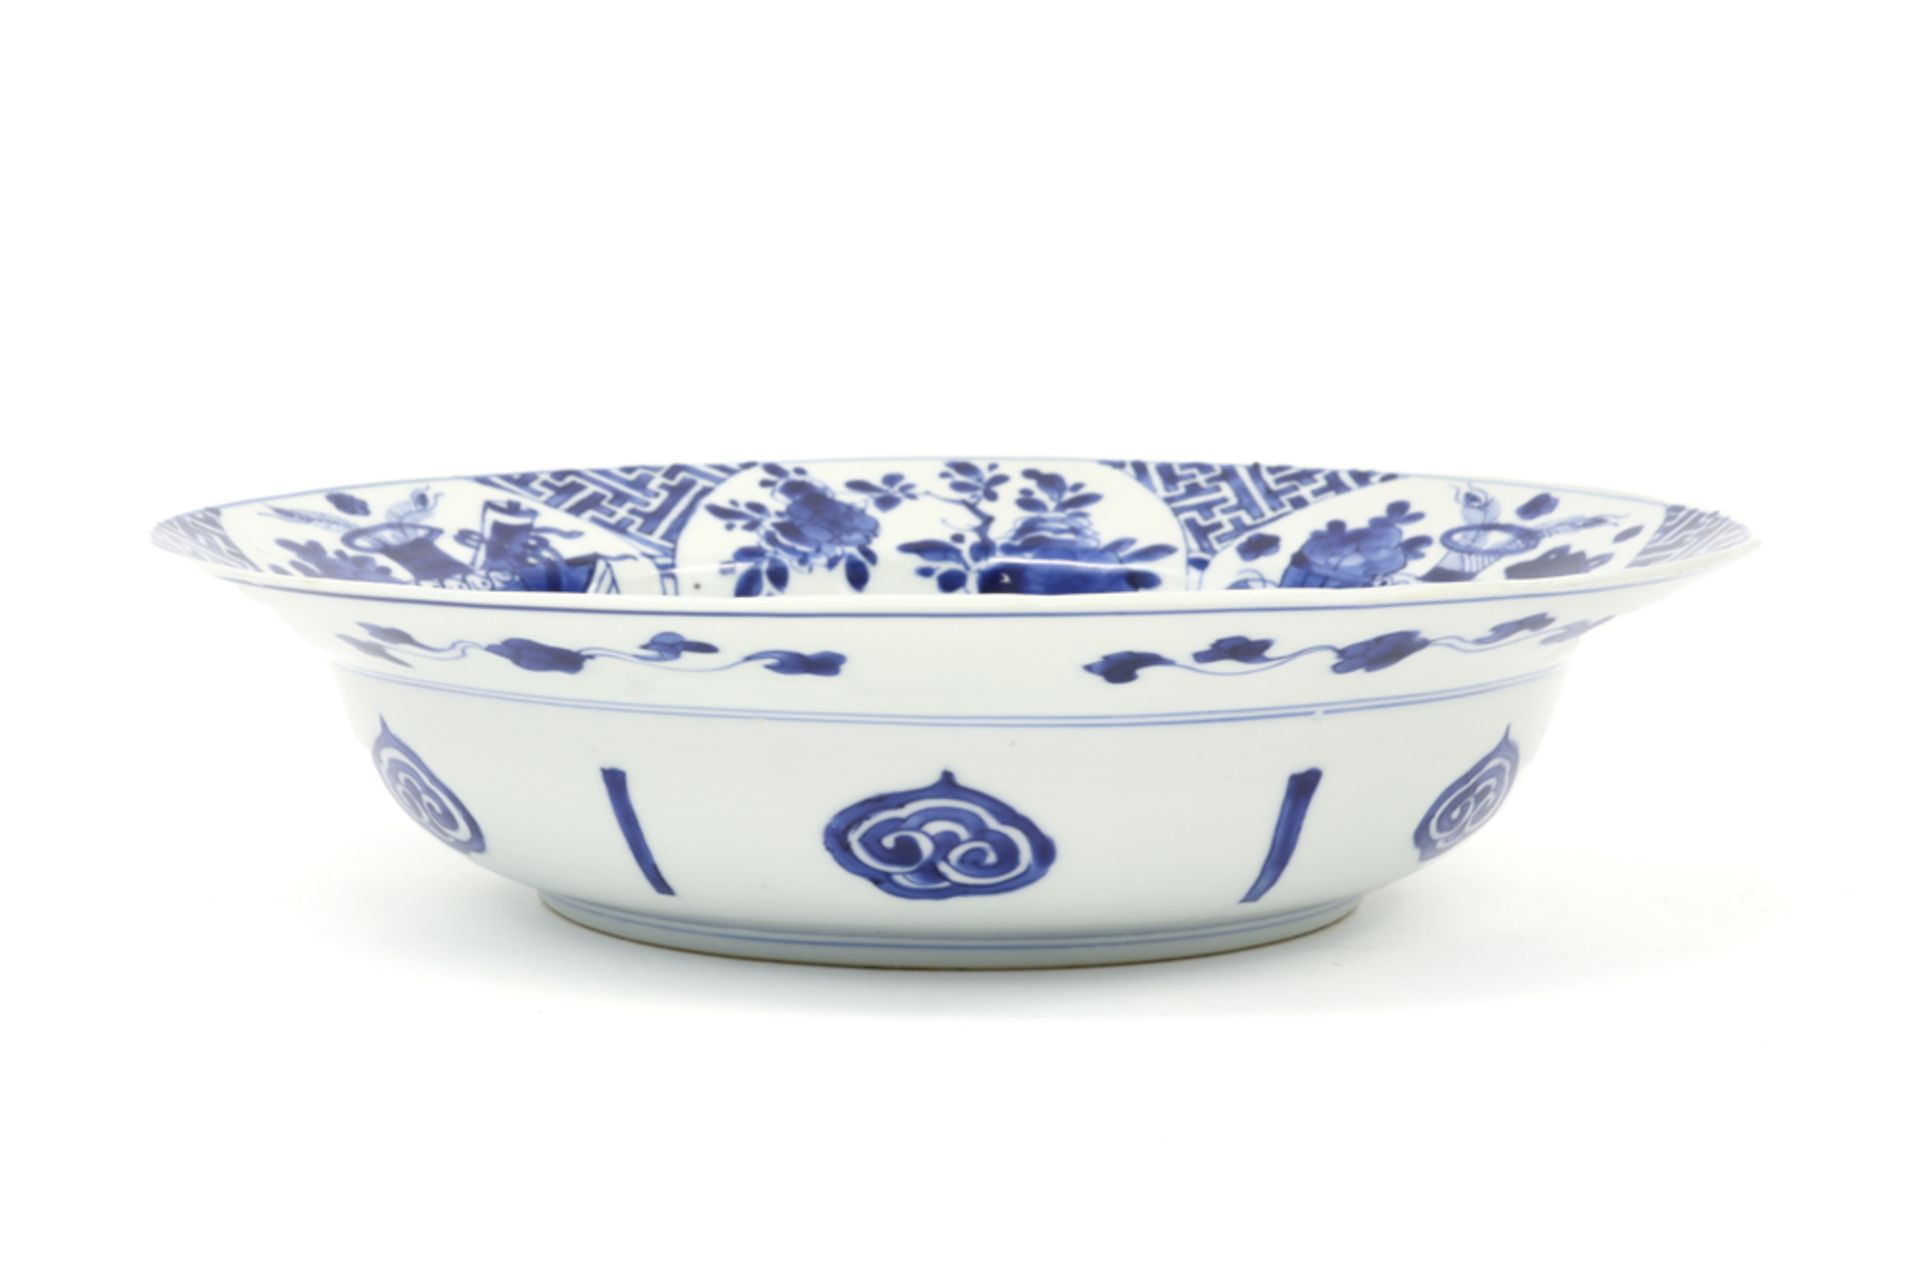 17th/18th Cent. Chinese Kang Hsi period bowl in marked porcelain with blue-white floral decor || - Image 3 of 3